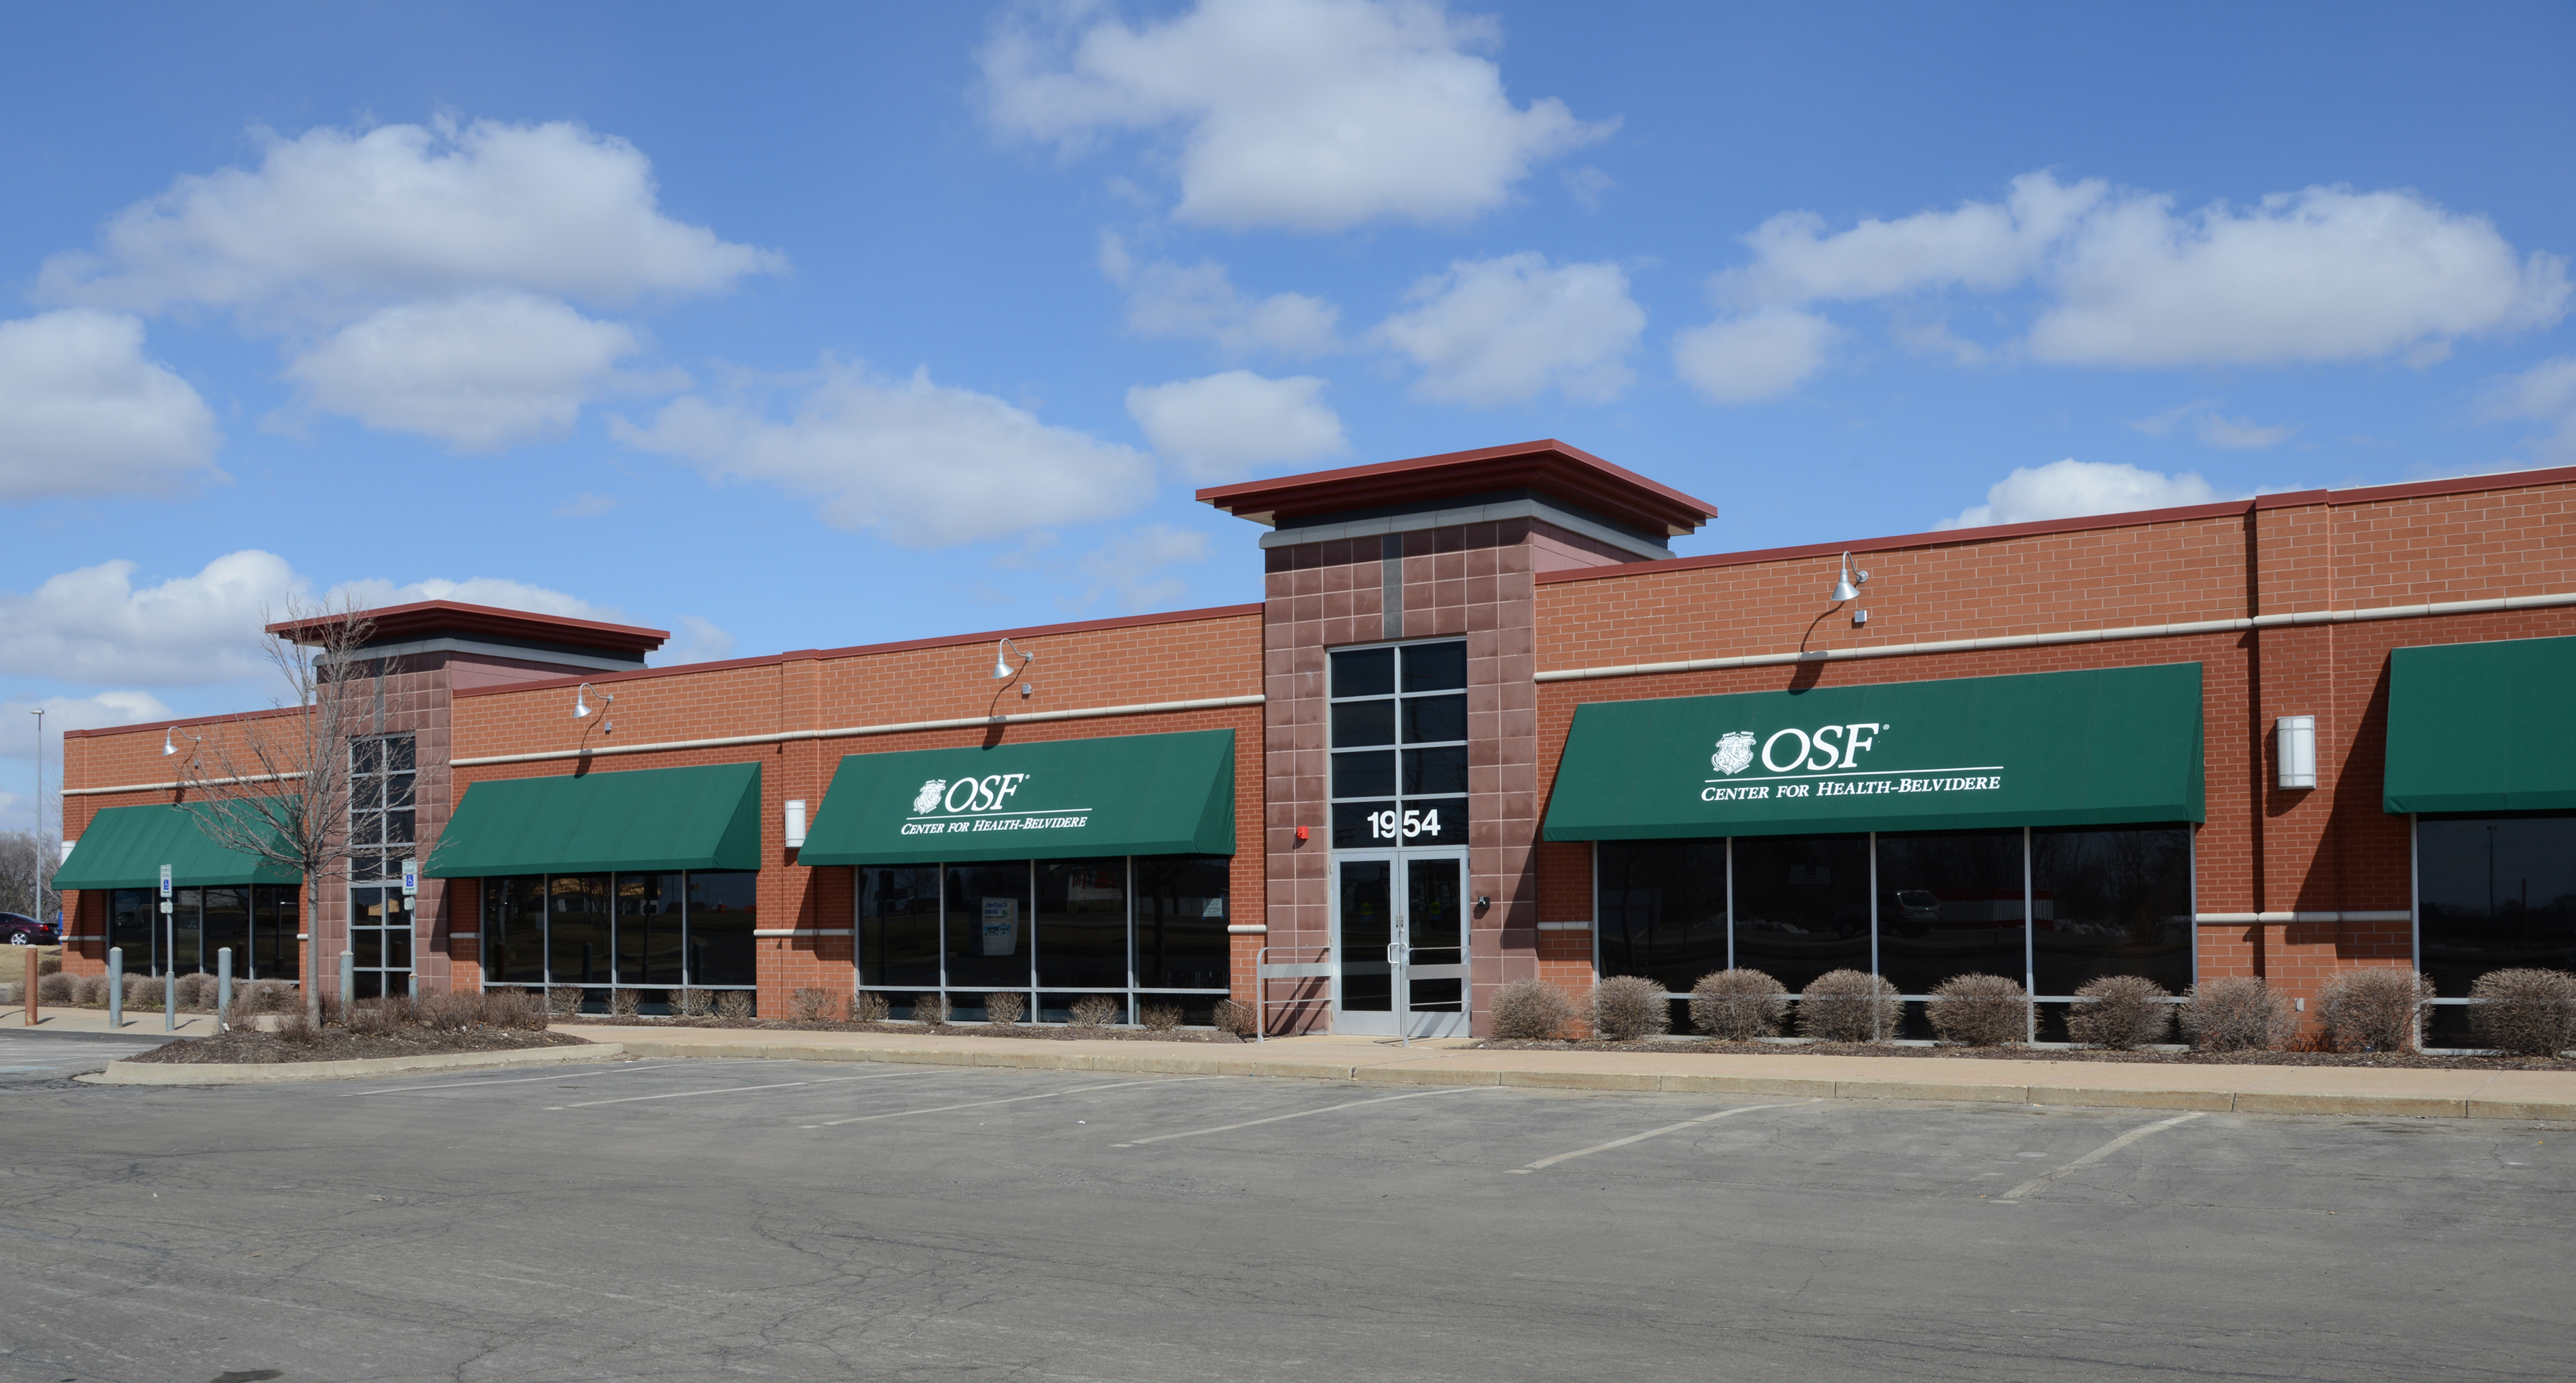 OSF Medical Group - Primary Care, 1954 Gateway Center Drive, Belvidere, Illinois, 61008